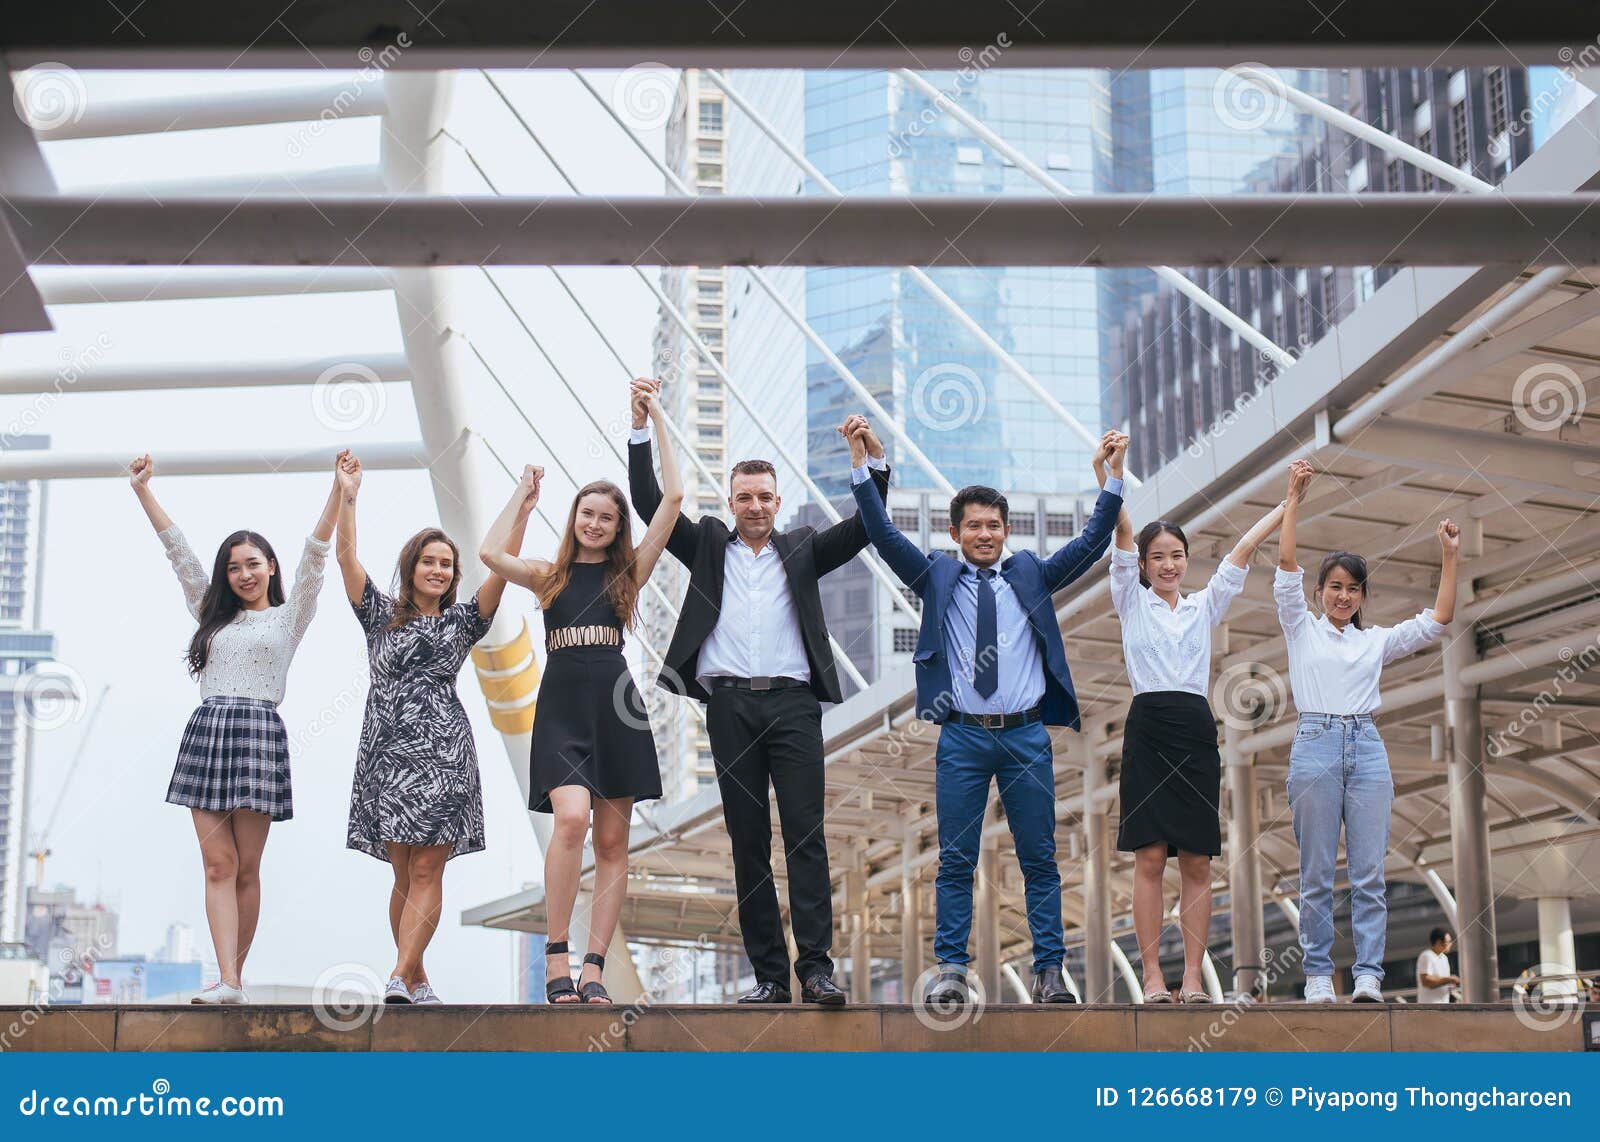 successful group of business people,success achievement hand raised,team work to achieve goals